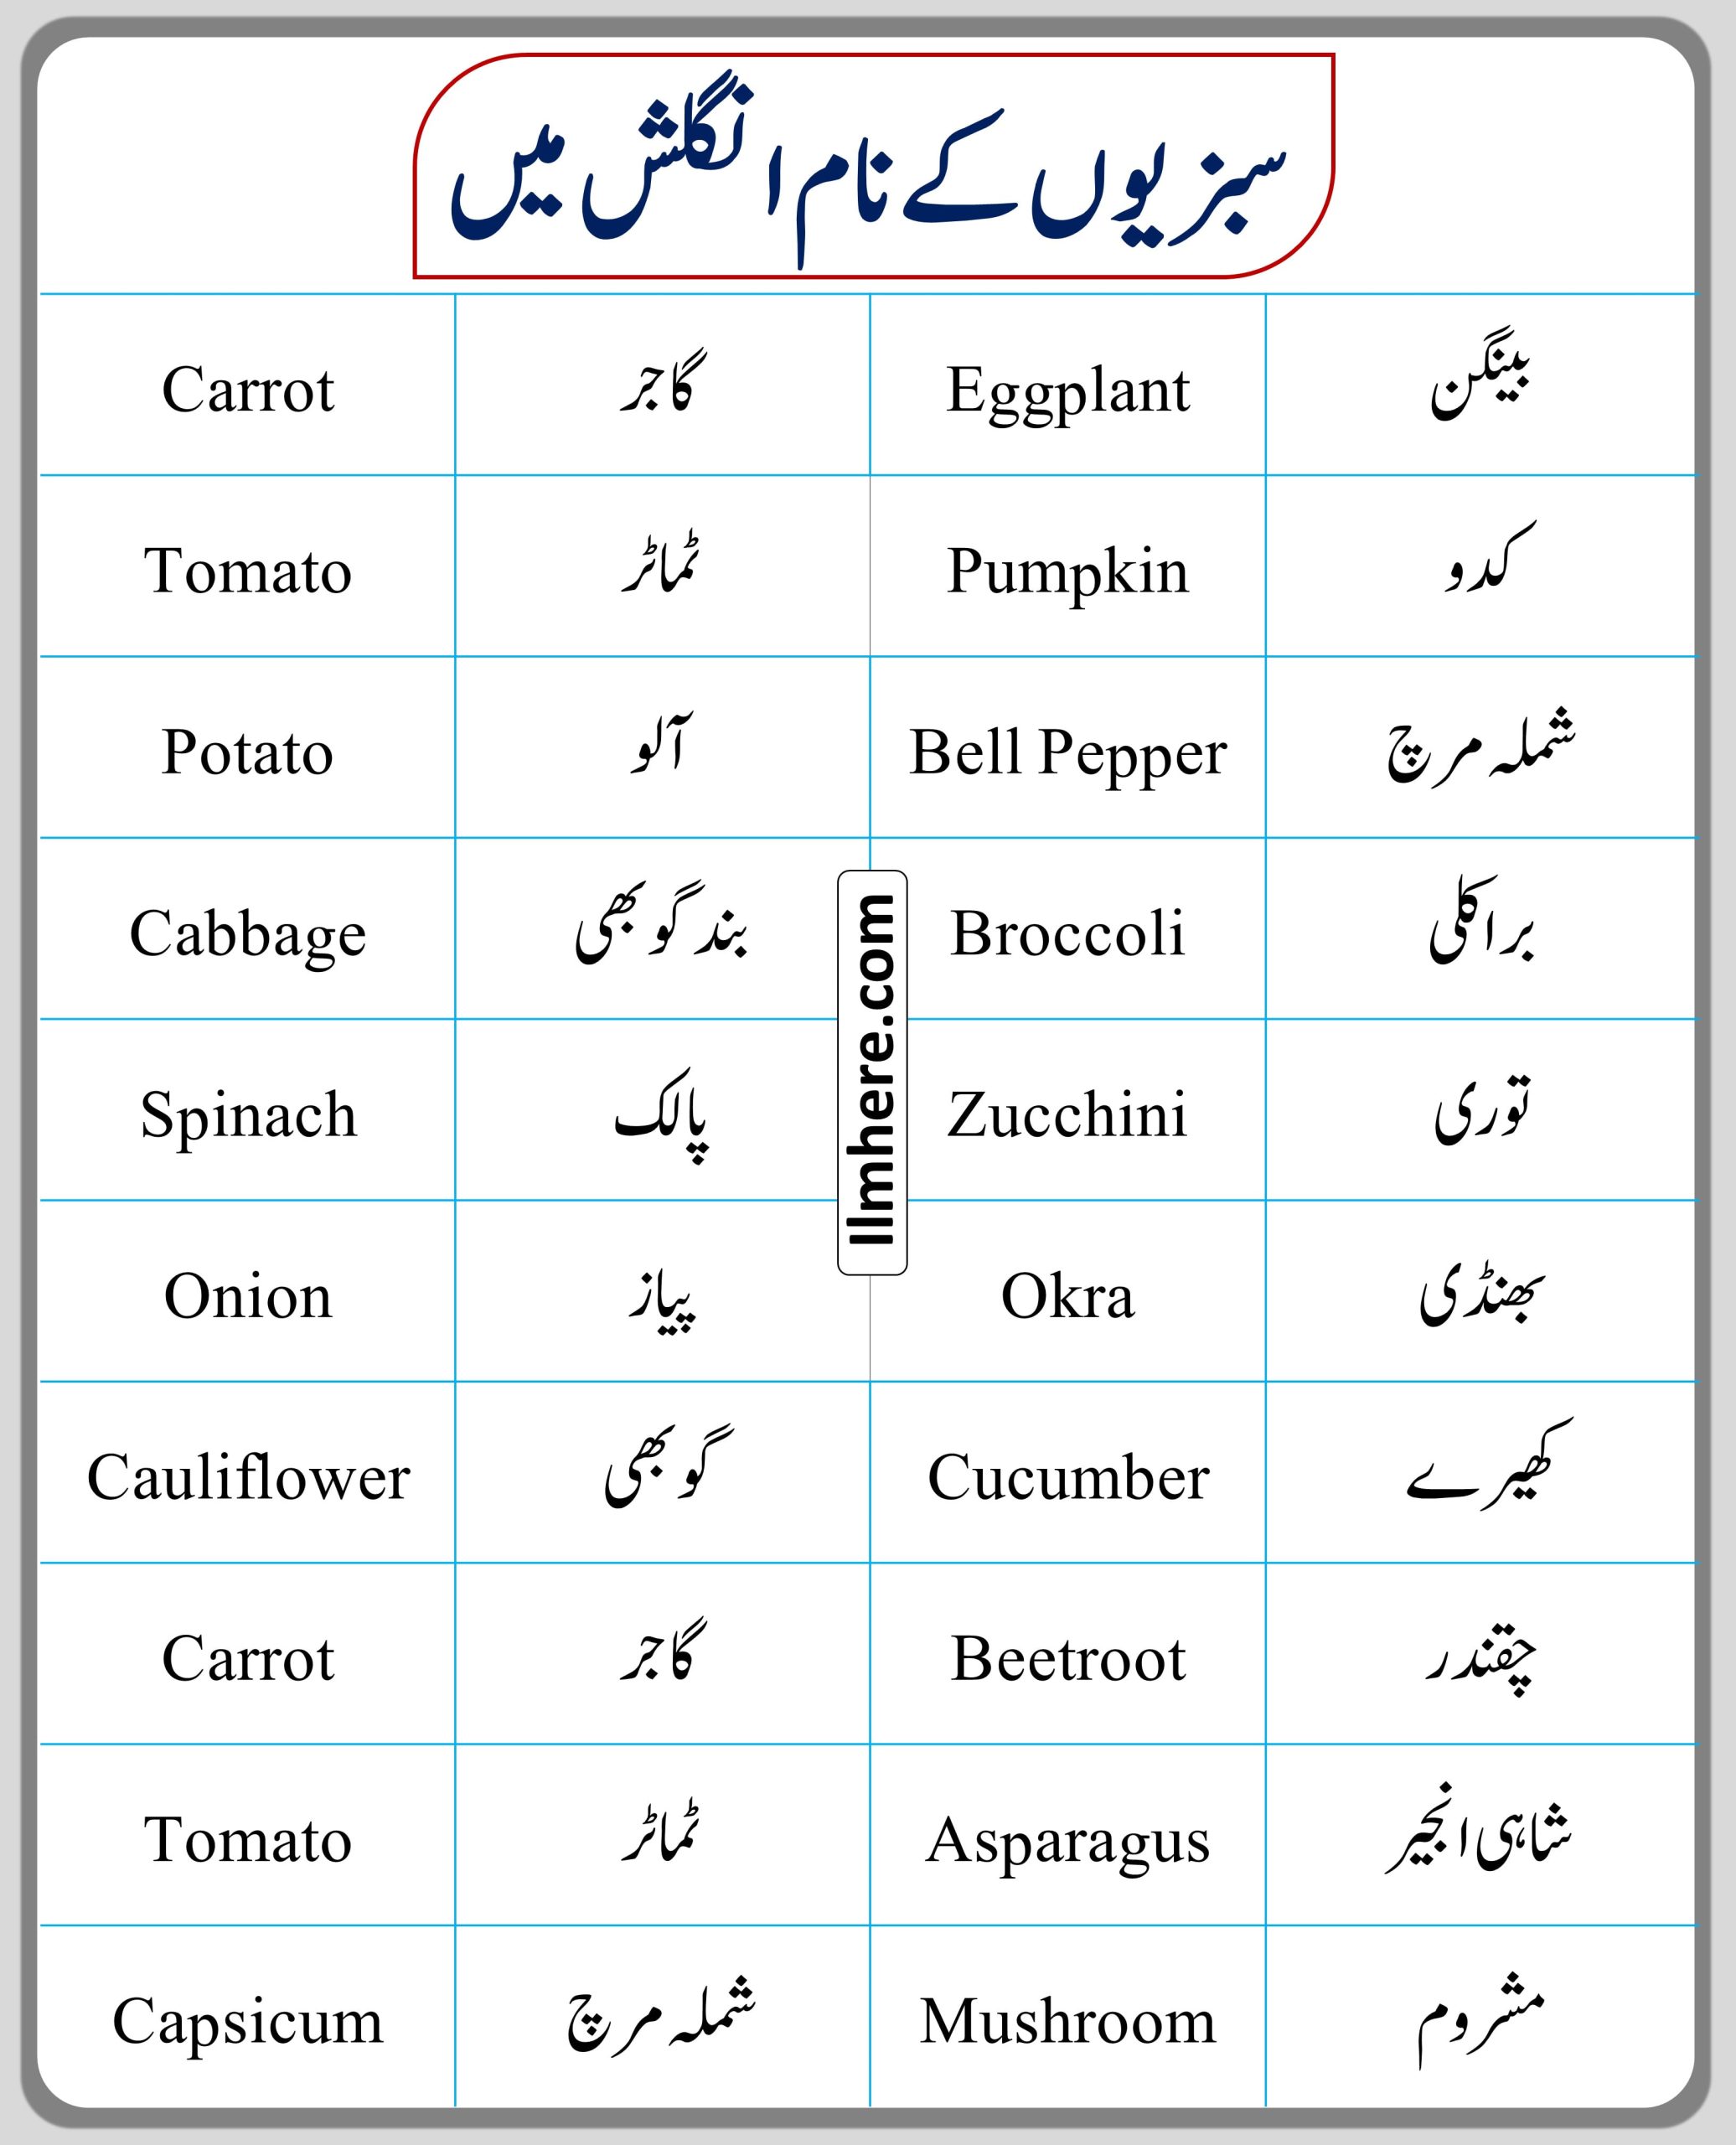 Vegetables Names List in English and Urdu